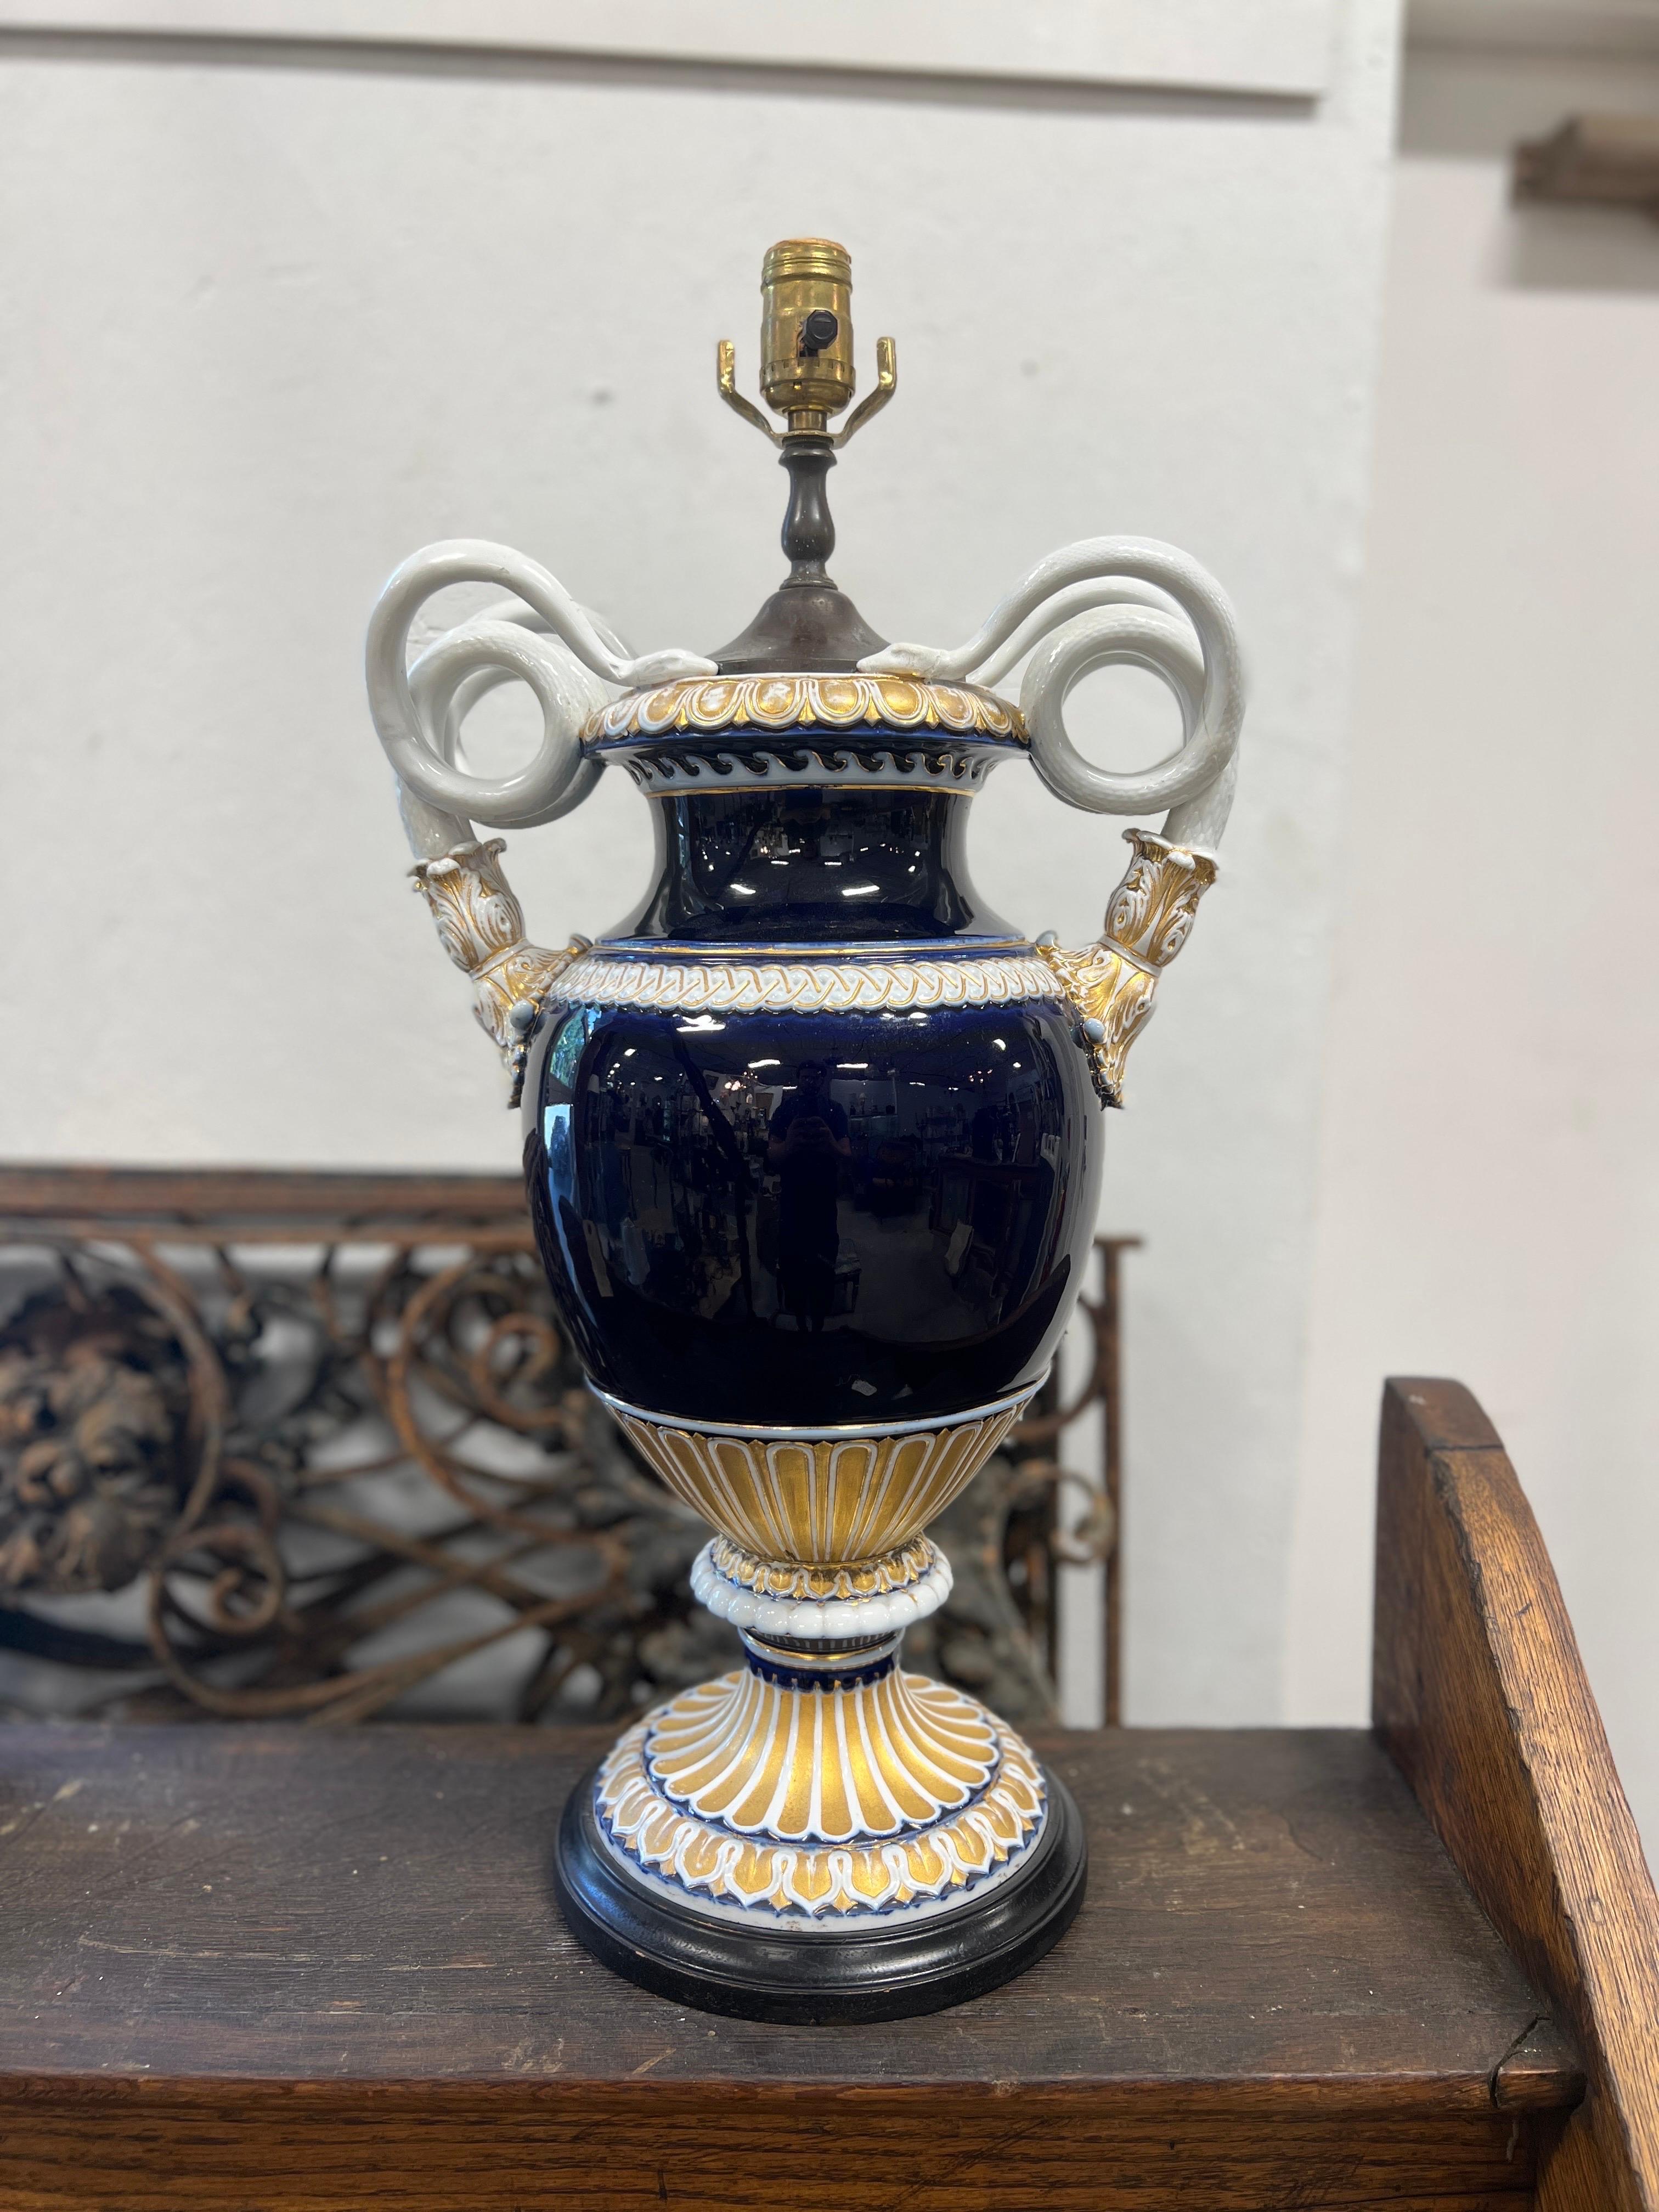 Meissen (German, founded 1710), circa mid 19th century.

This stunning antique Meissen urn has been converted to a table lamp. It features a Neoclassical baluster form with gilt and white gadrooned rim flanked by paired coiled serpent handles and